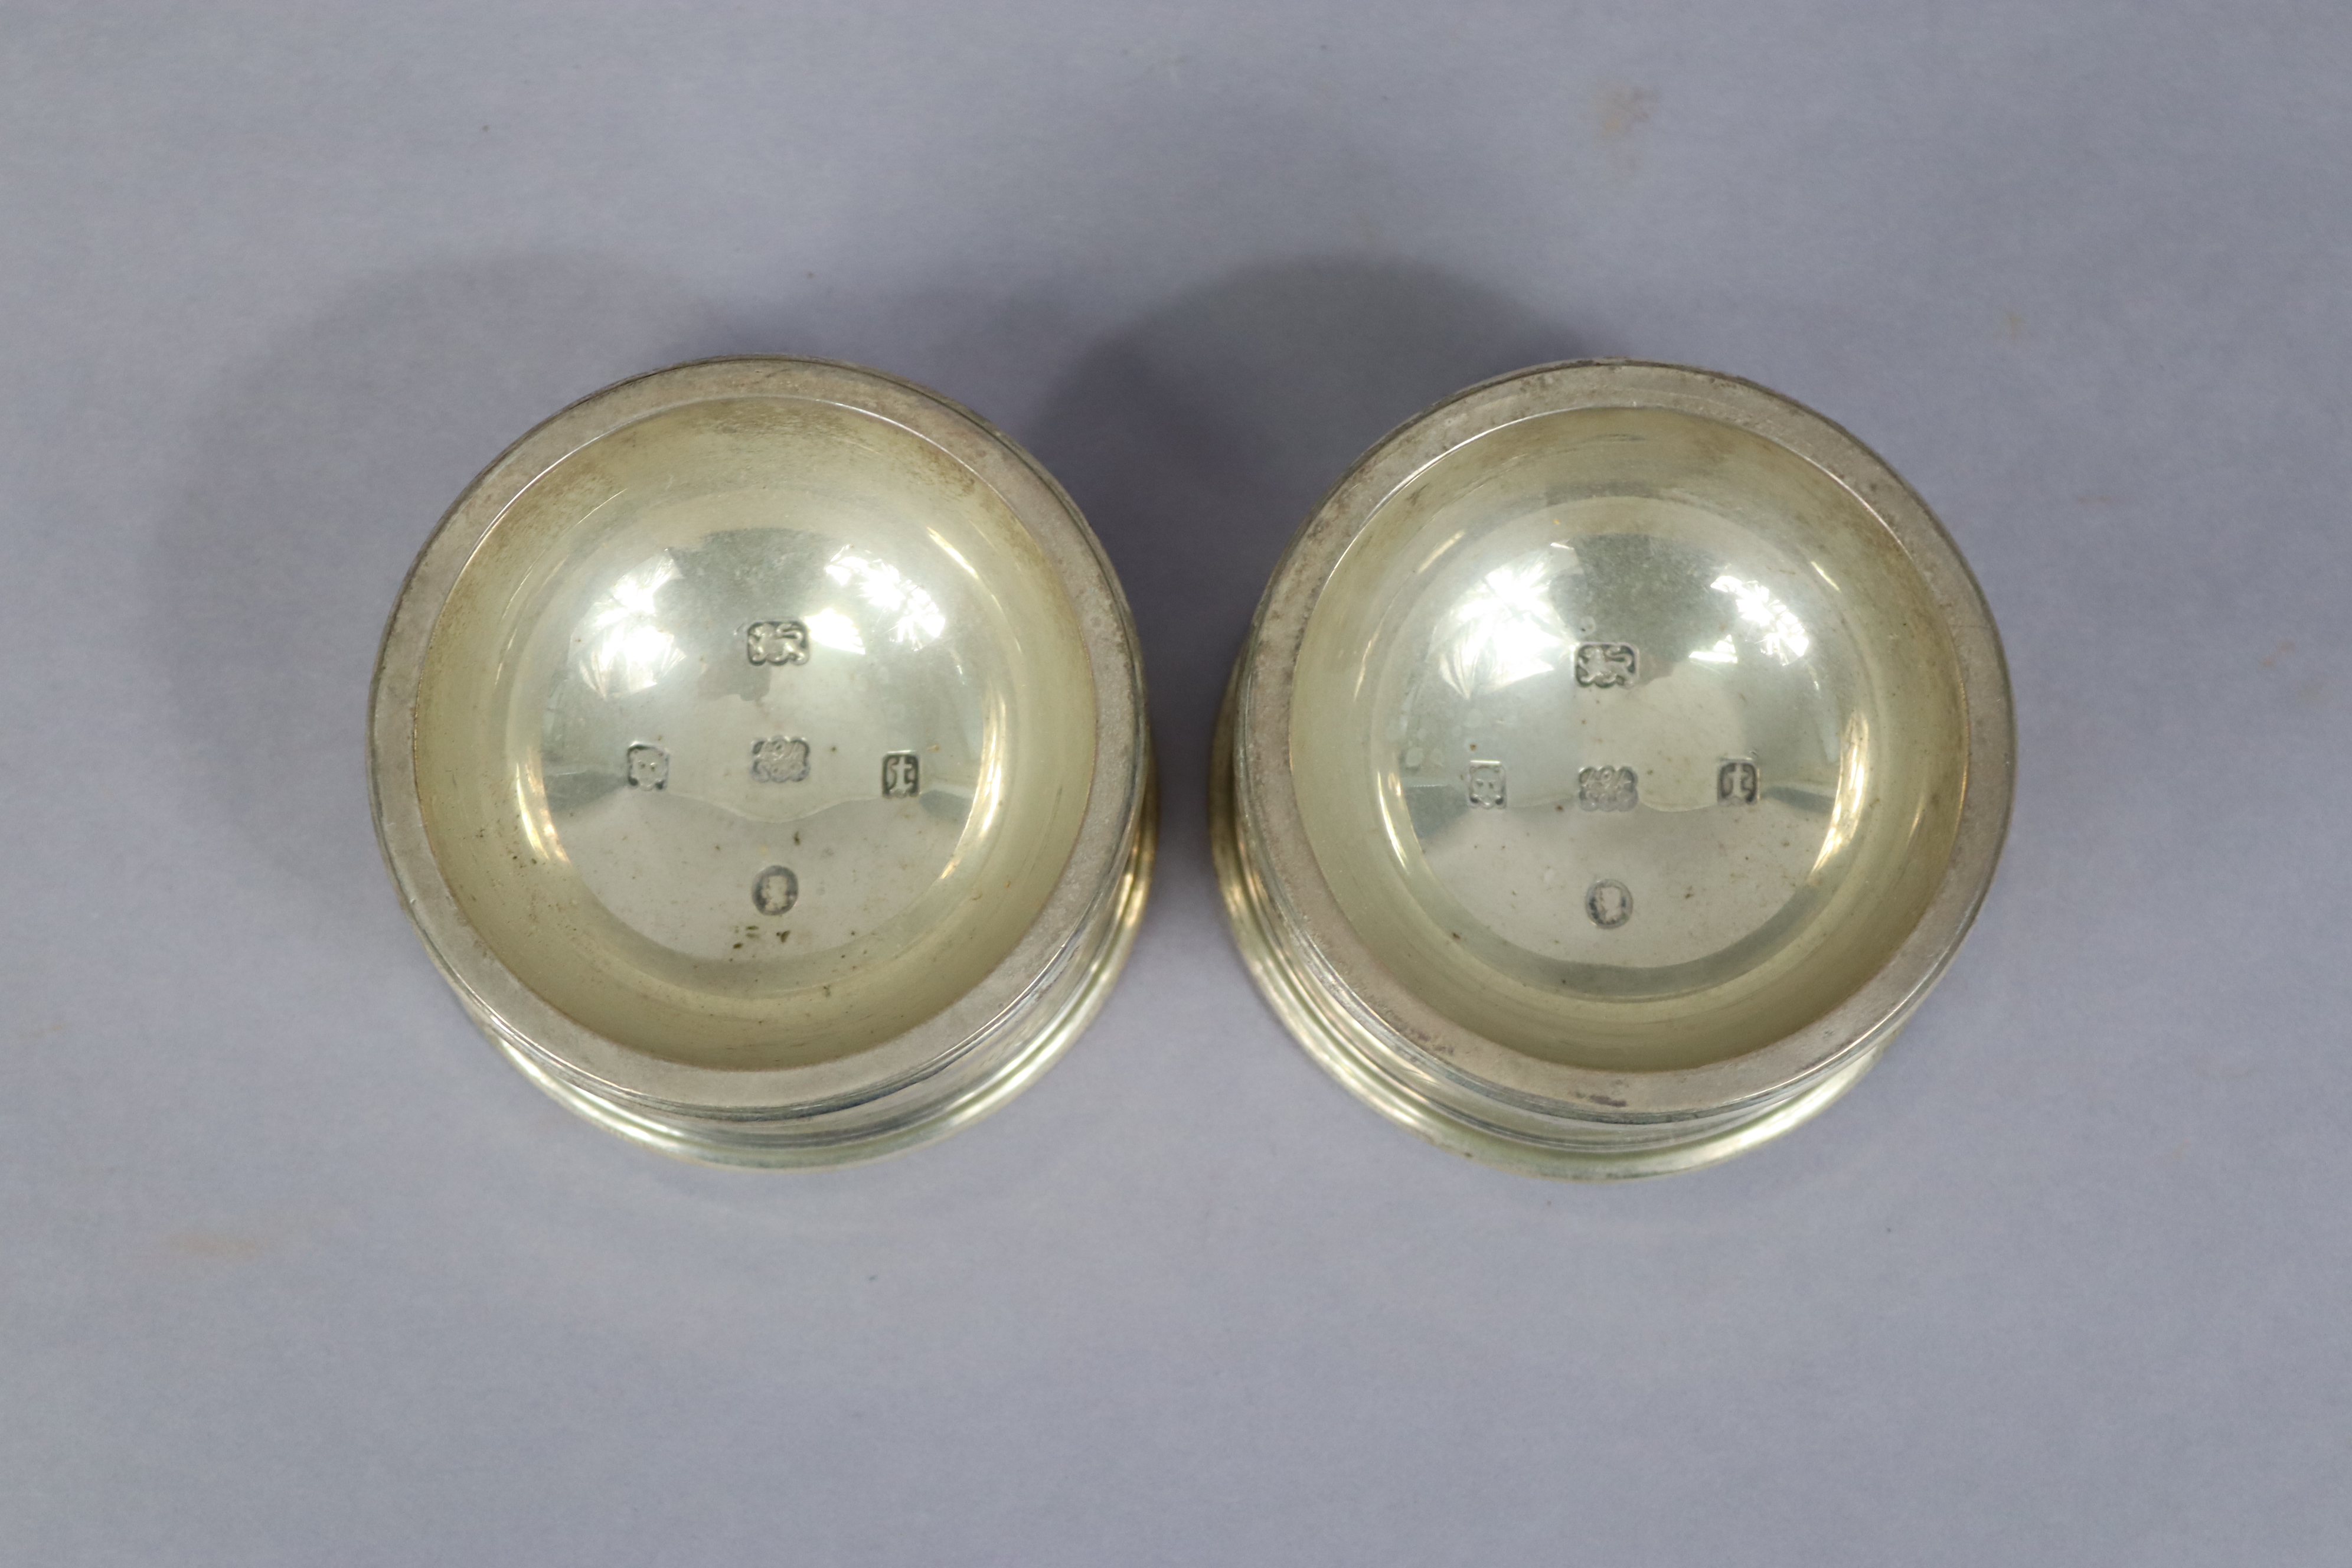 A pair of early 17th century-style silver salt cellars to commemorate George V silver Jubilee in - Image 4 of 6